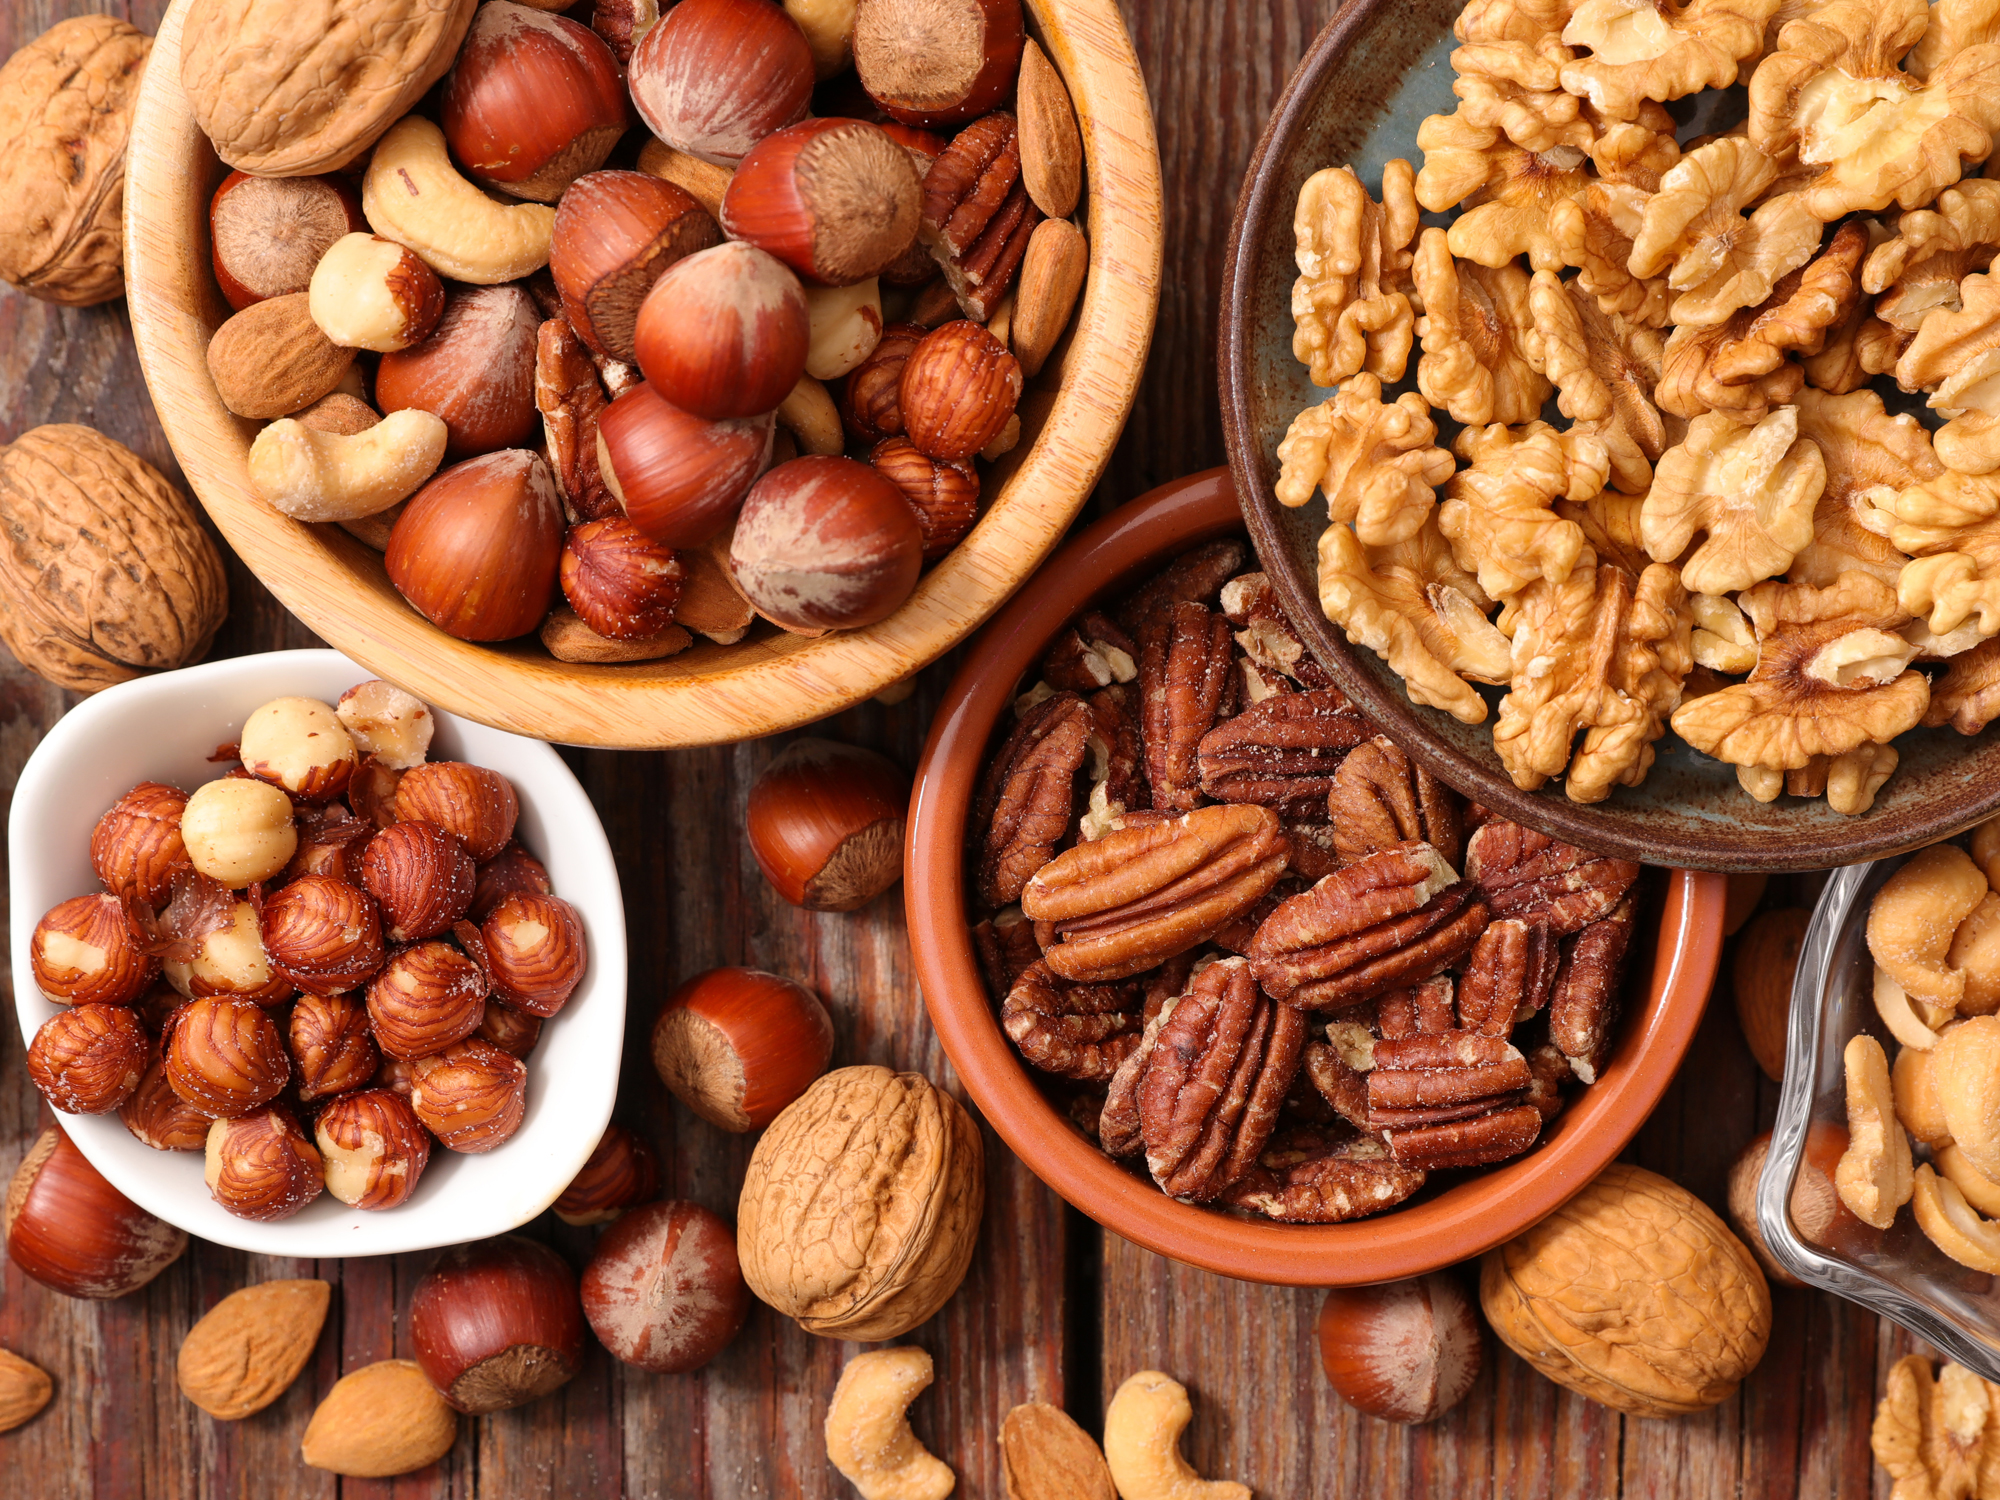 The nut that cracks two common nutrient deficiencies